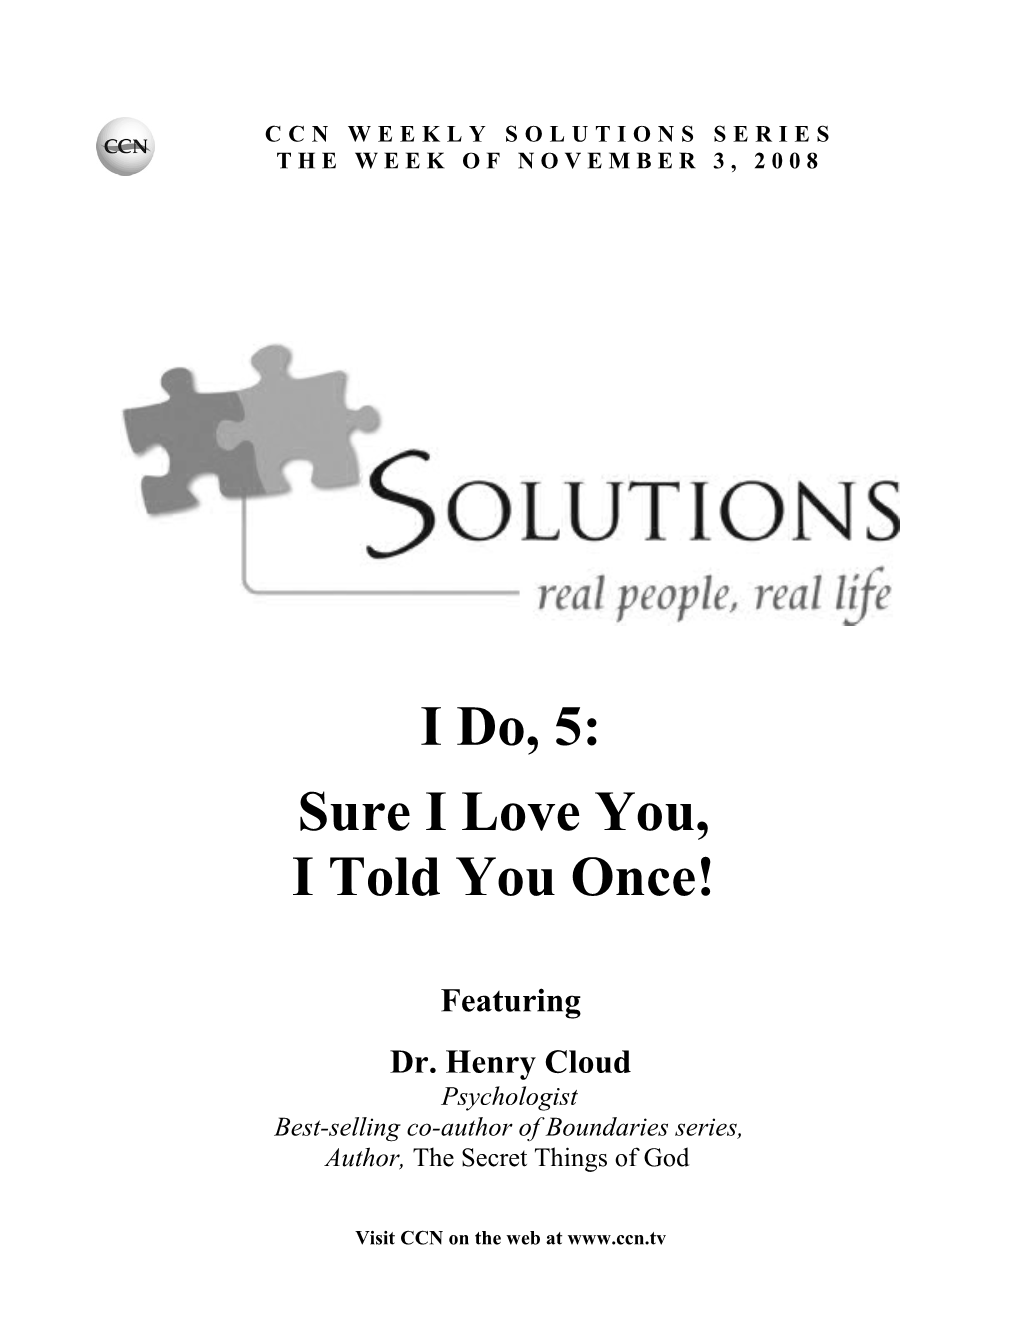 Ccnsolutions: I Do, 5 Sure I Love You, I Told You Once!Page 1